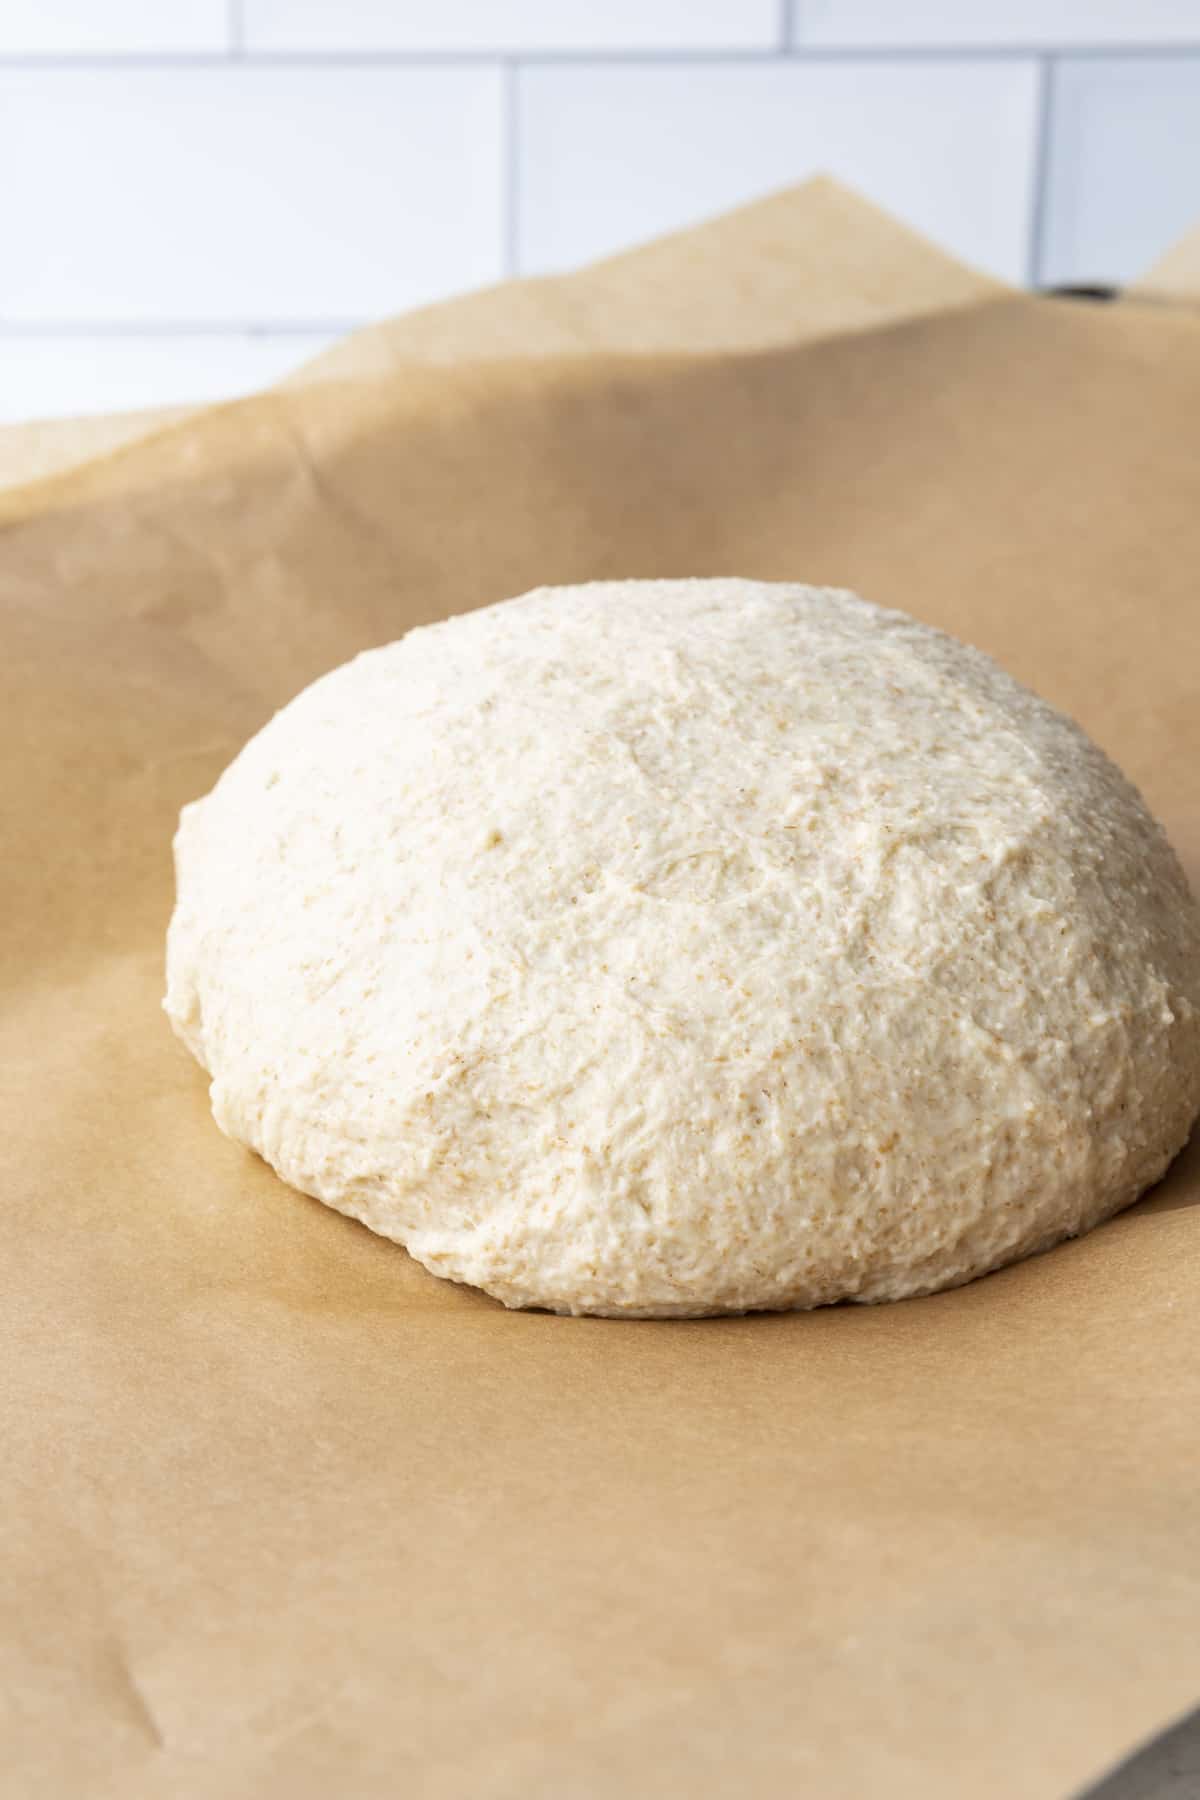 This whole wheat pizza dough yields our family's favourite pizza crust; crispy and chewy, flavourful crust that holds up to anything you put on it.